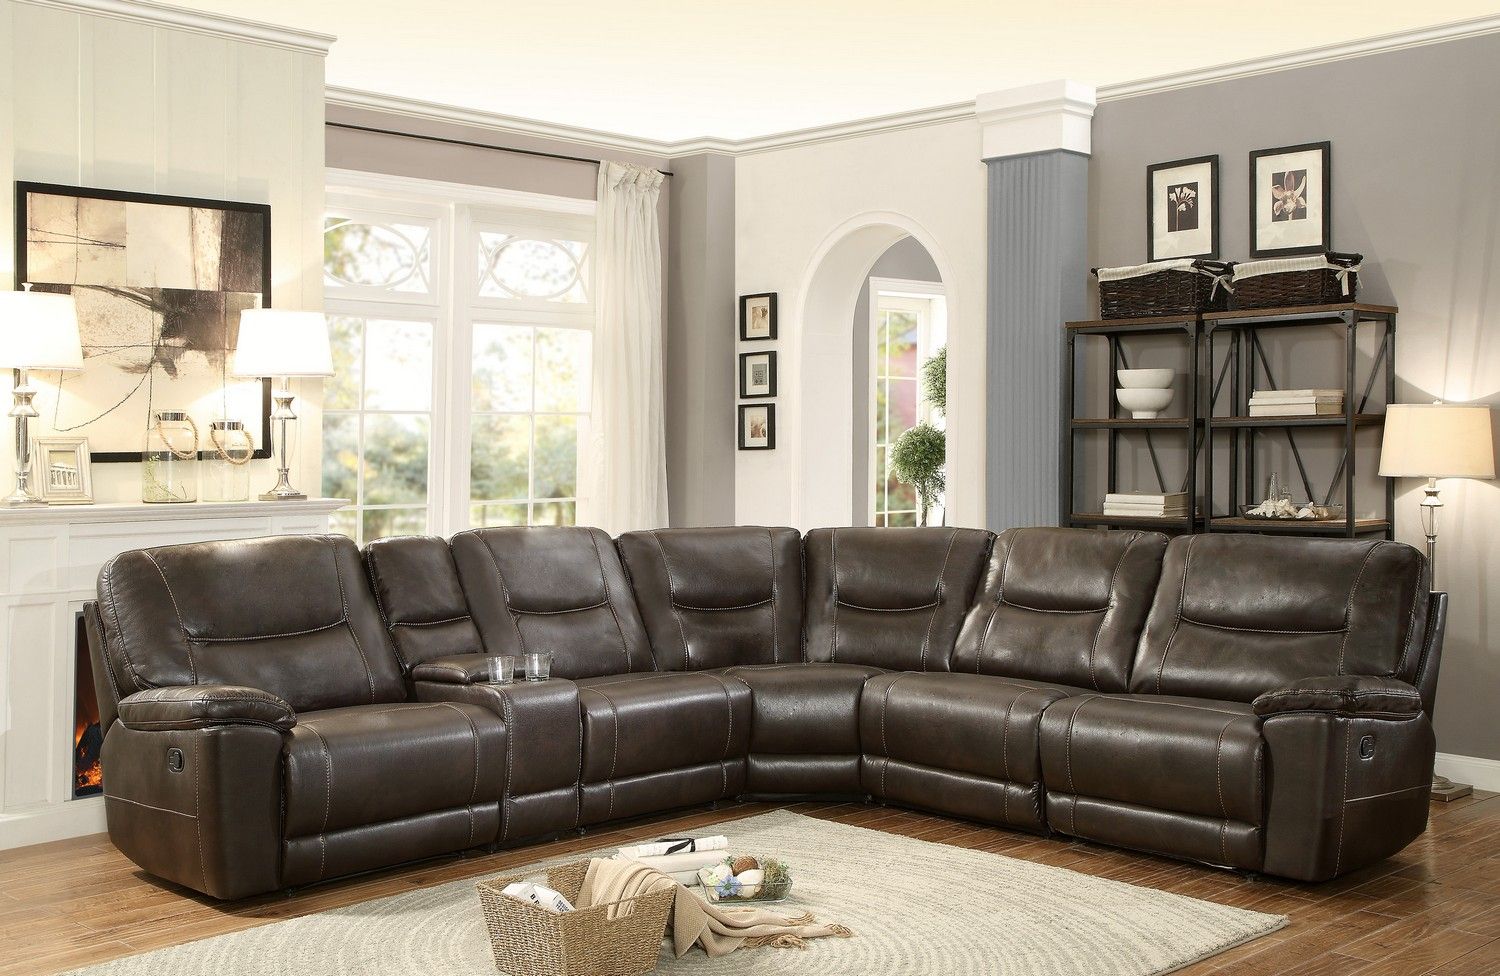 Homelegance Columbus Reclining Sectional Sofa Set D – Breathable Faux  Leather – Dark Brown 8490 Sectional Set D | Homelegance  Elegancefurnituredirect Inside Faux Leather Sectional Sofa Sets (View 12 of 15)